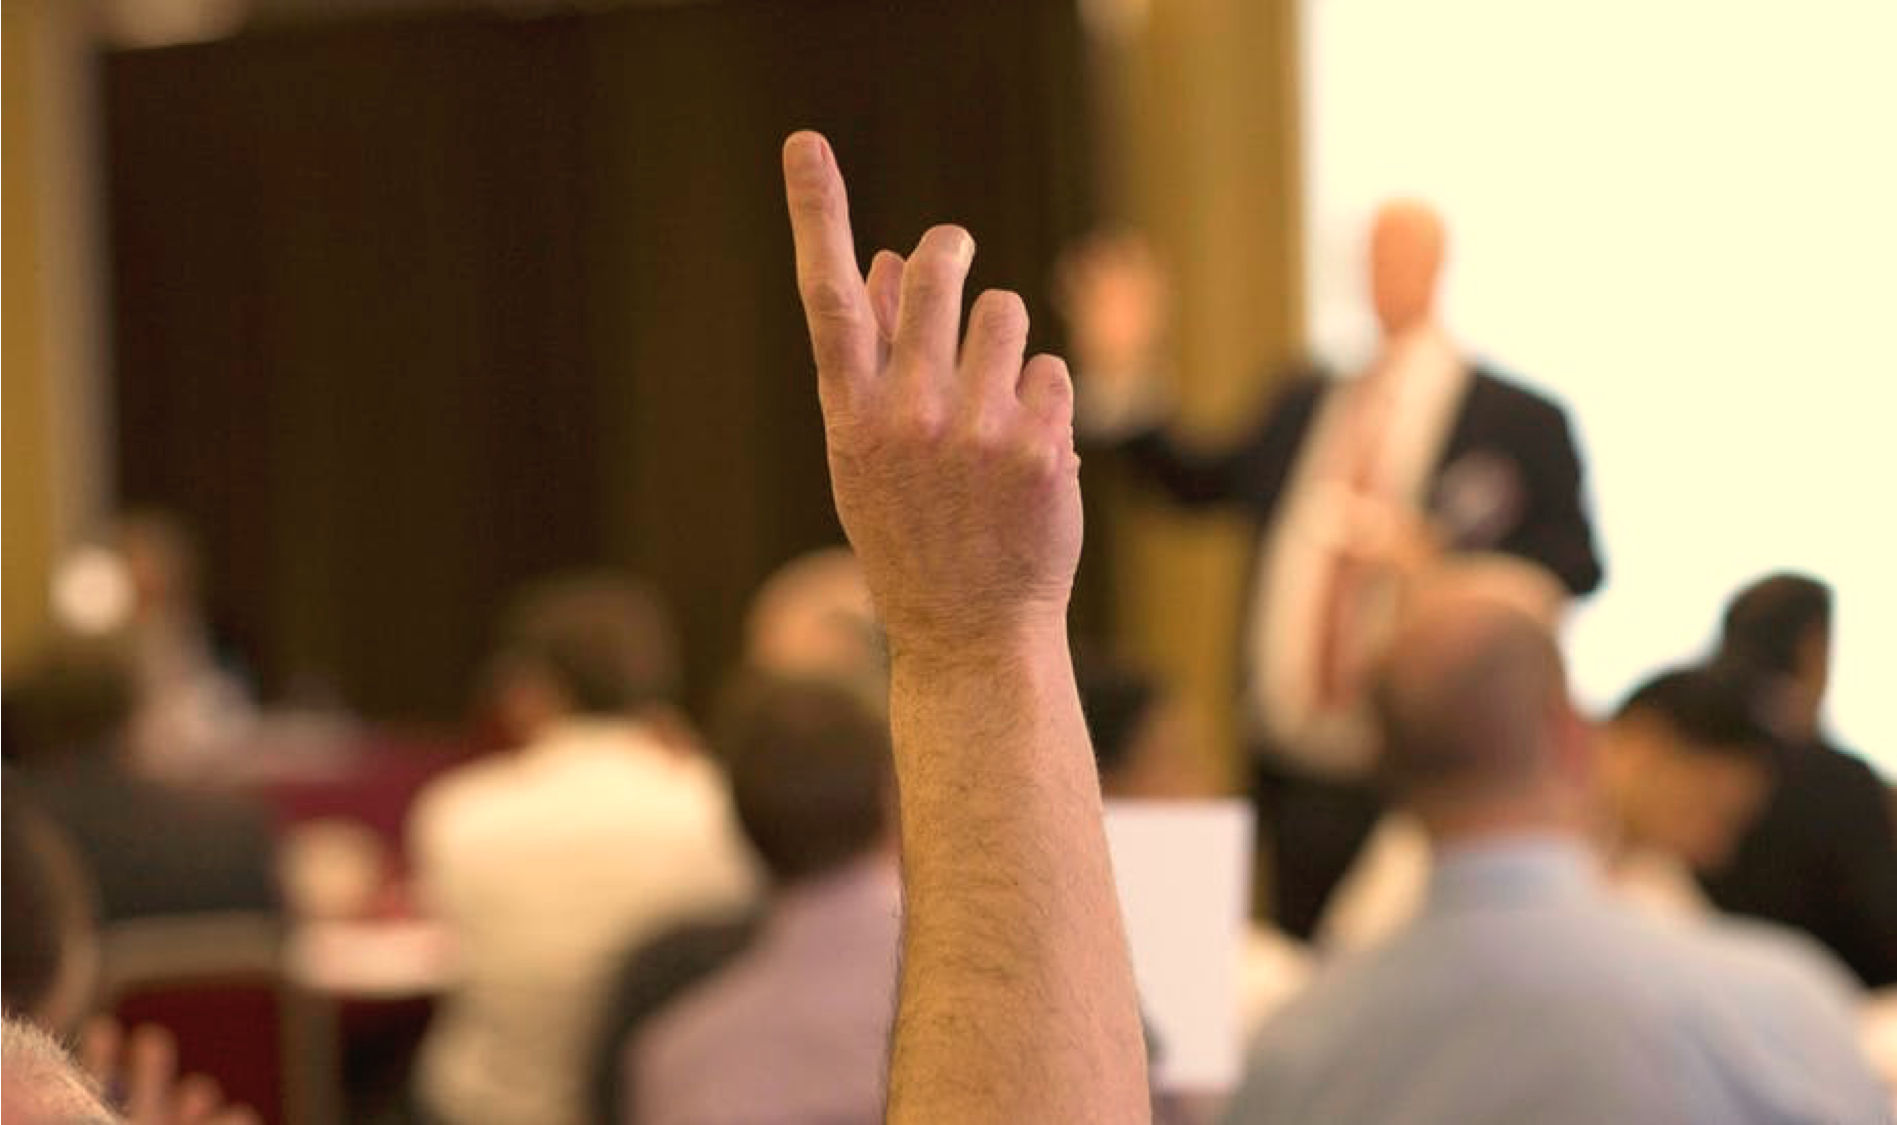 Hand in the air gesturing question at public speaking conference